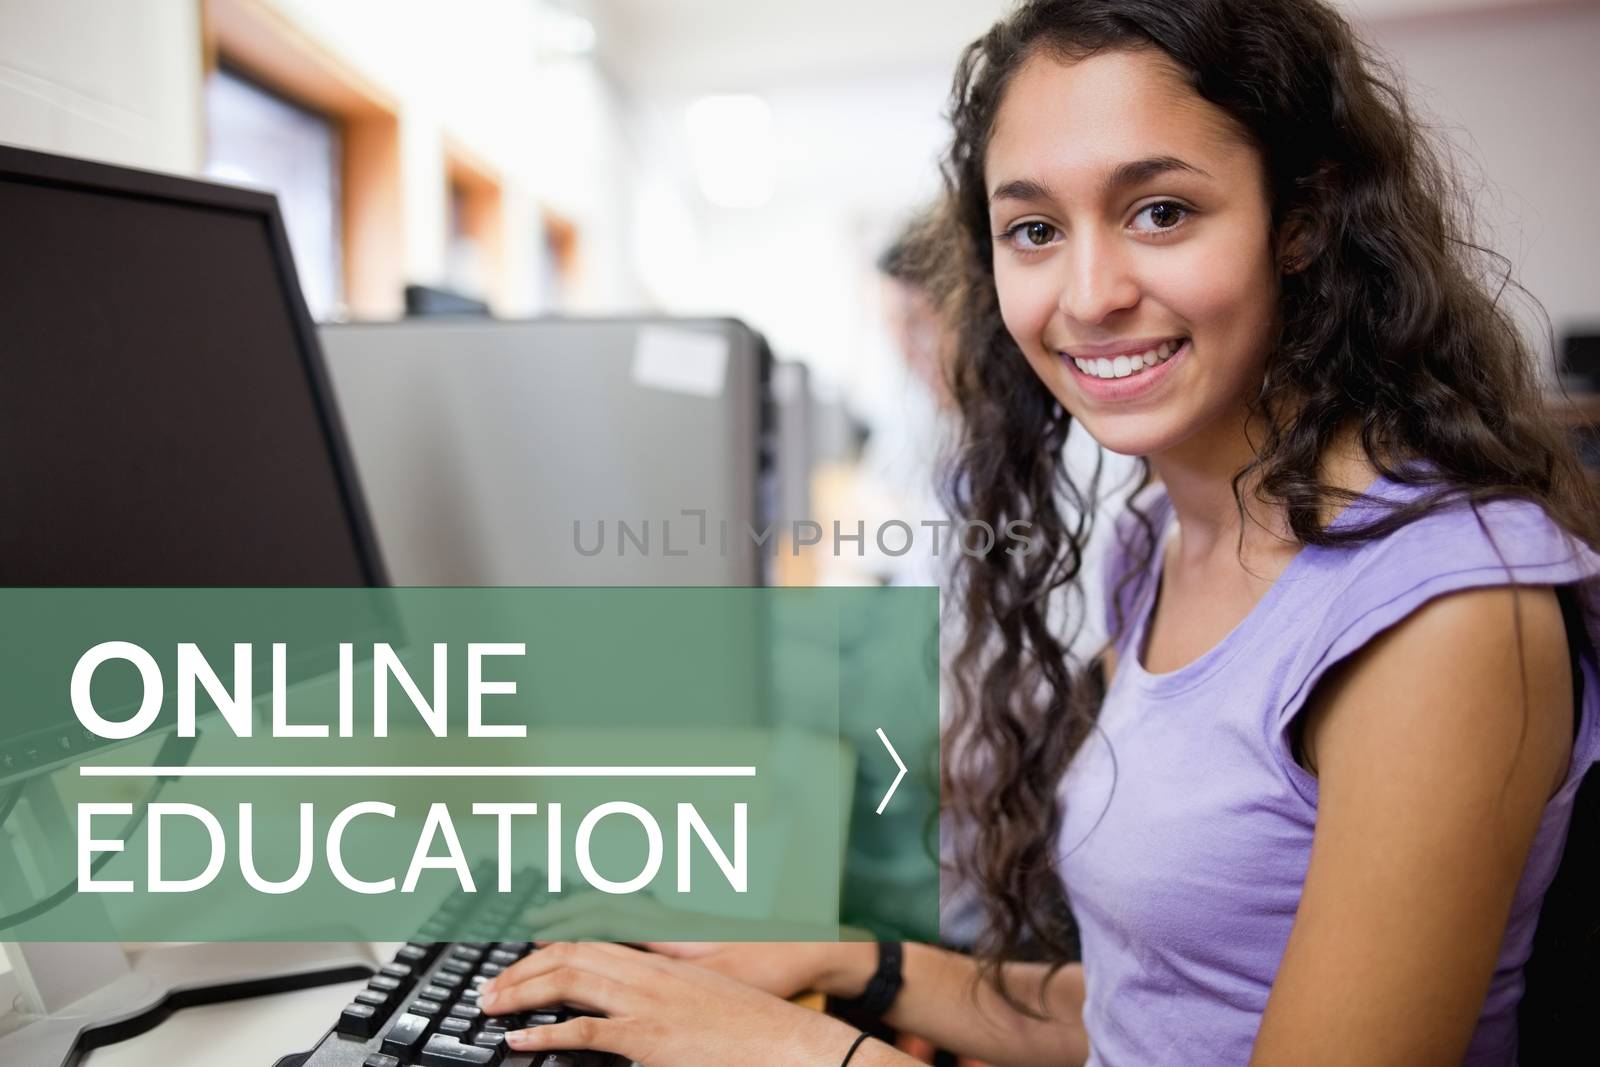 Digital composite of Online education text and woman using a computer